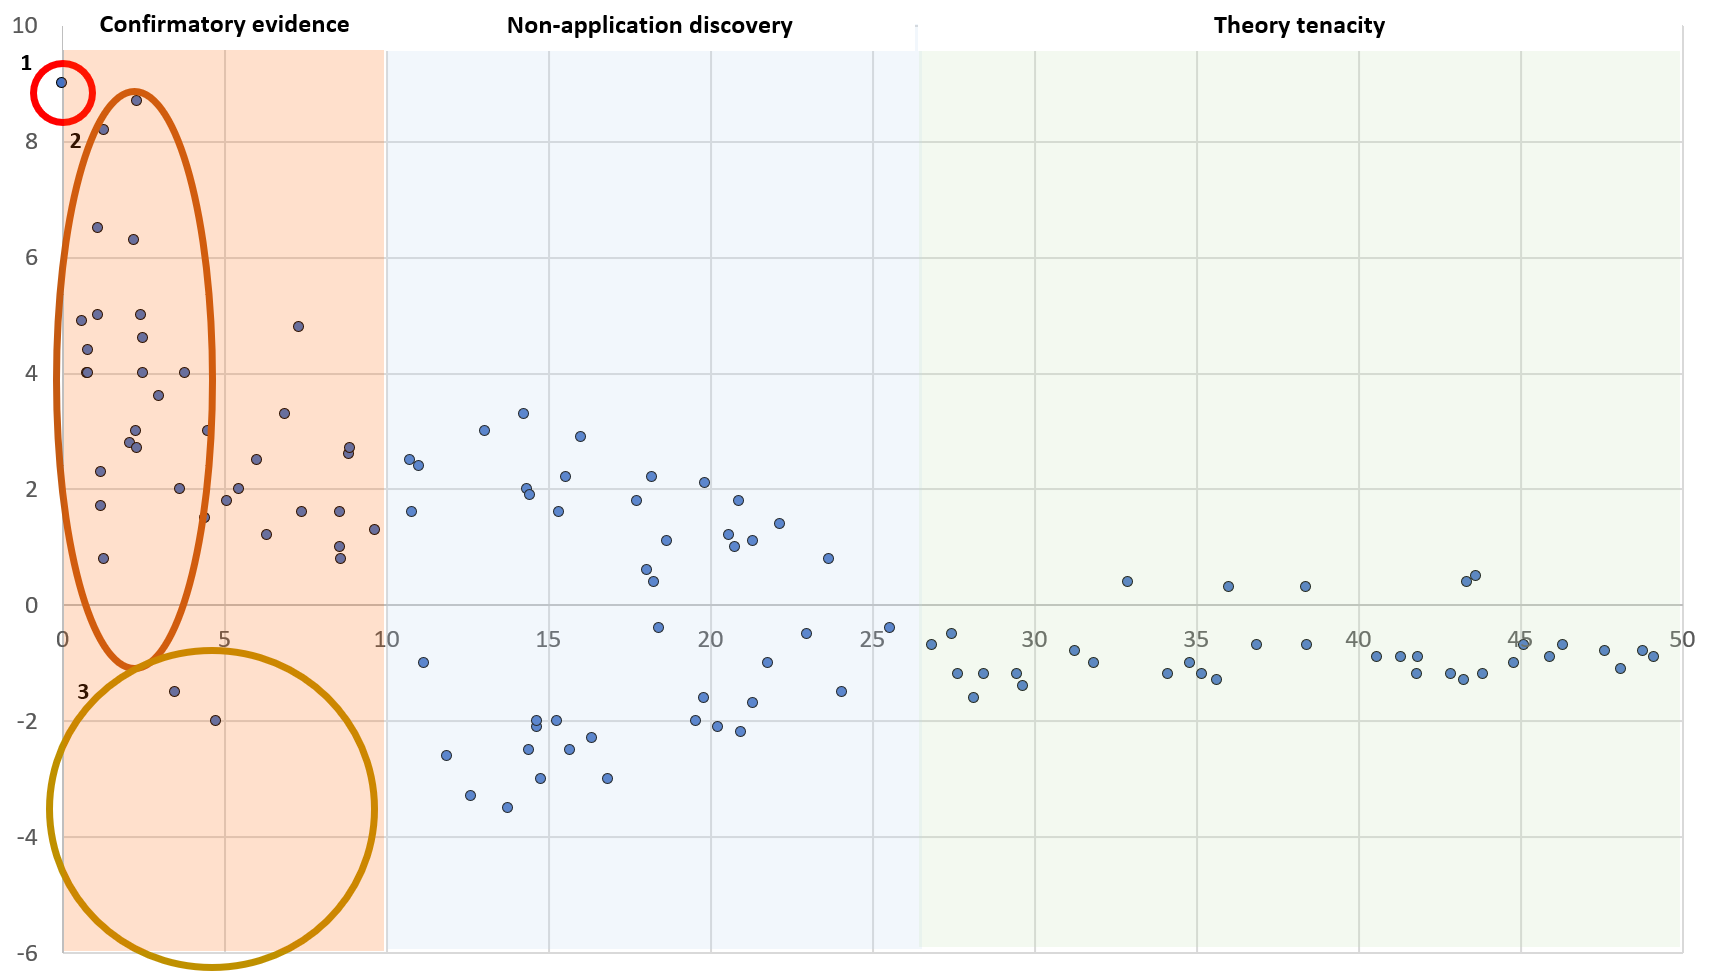 A funnel plot demonstrating the three phases of theory maturation: confirmatory evidence, non-application discovery, and theory tenacity. In this plot, created with fictional data, the y-axis represents effect size while the x-axis shows time (in years) since an idea is first published (1). Each point represents a published study. In the first phase (confirmatory evidence), following the initial publication (1) we see a plethora of studies with large effect sizes (2) published in high impact journals that have no negative findings (3). In the second phase (non-application discovery), we see the first negative findings, but again studies with small effect sizes are missing, and there are still positive studies so that the theory has a great deal of debate. At the beginning of the third phase (theory tenacity), an important meta-analysis is published showing no significant overall effect. Publications thereafter attempt to replicate earlier results but fail to show any merit in the thory.